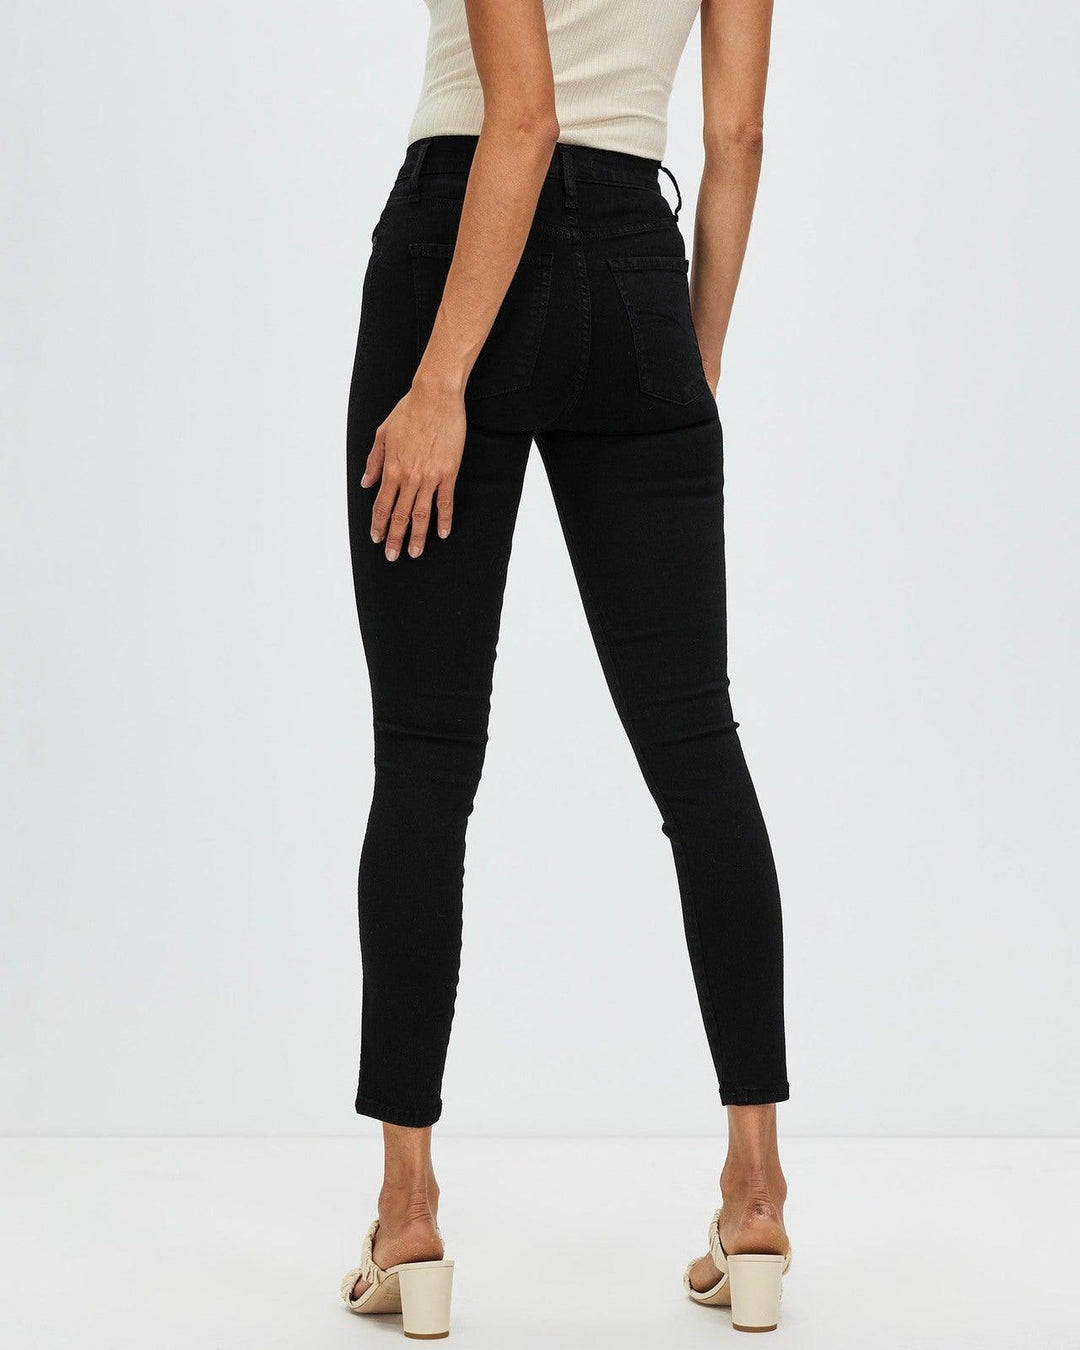 NOBODY Cult Ankle Skinny High Rise Black Jeans- Size 30 - Jean Pool